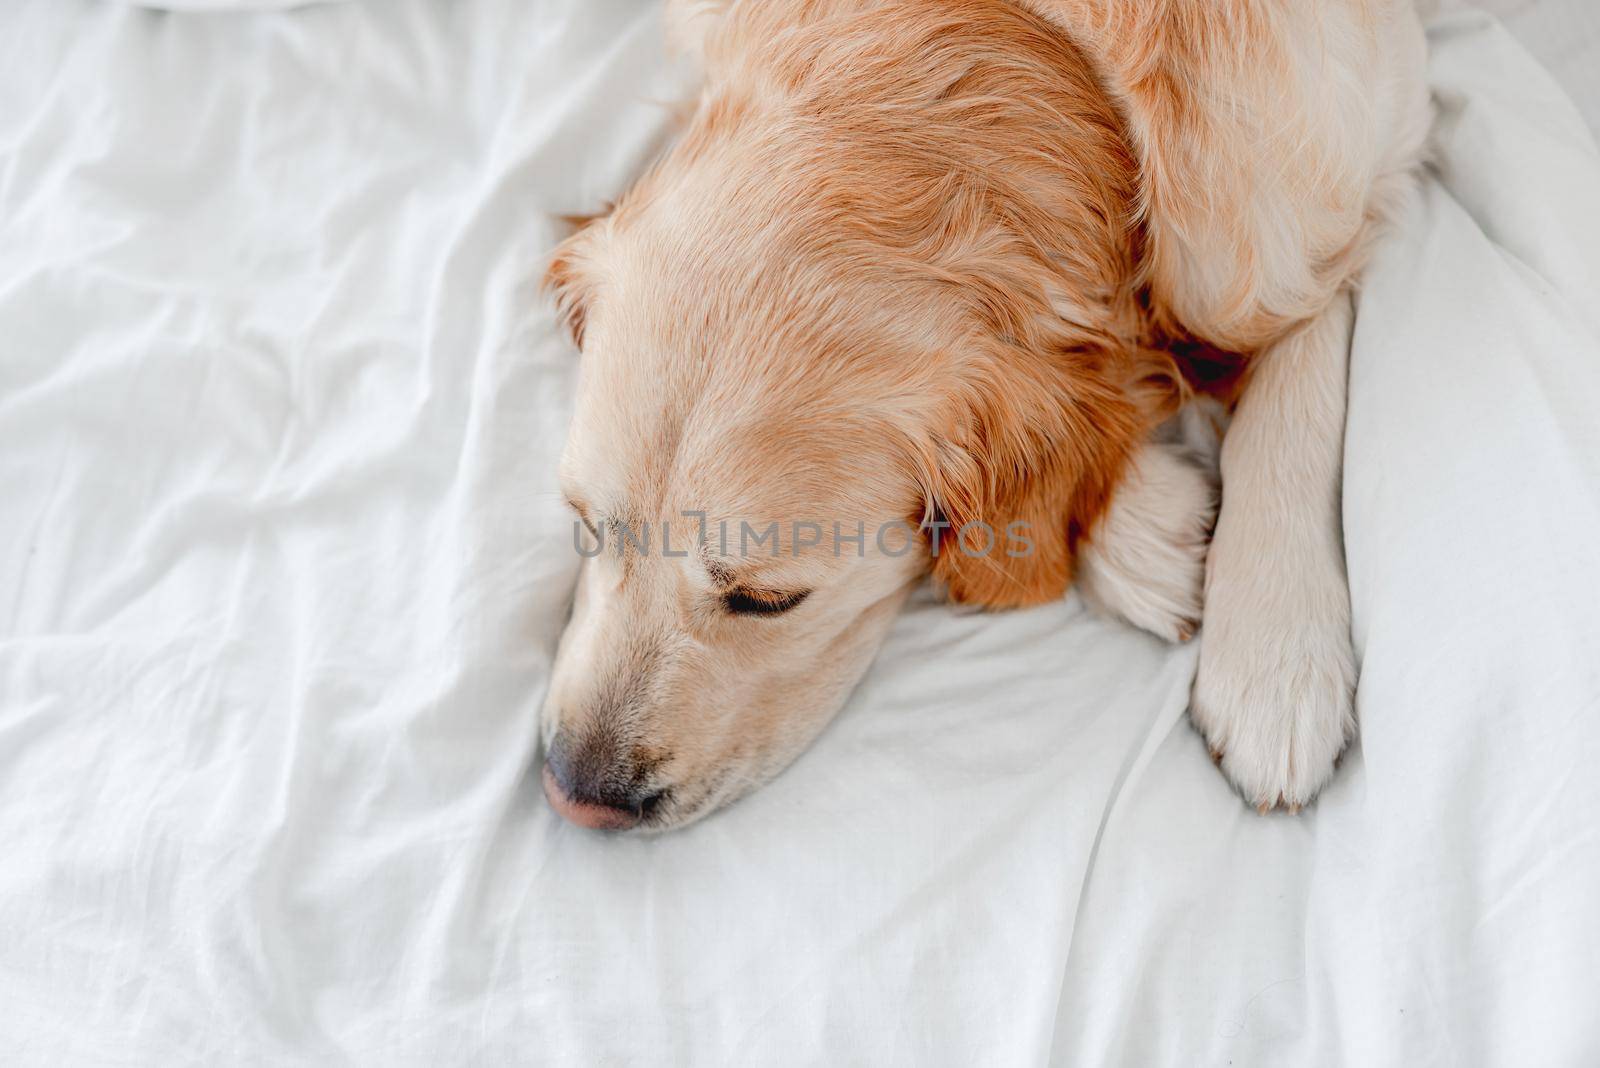 Golden retriever dog lying in the bed on white sheets. Cute doggy resting at home in the morning time. Portrait of pet indoors with daylight from above